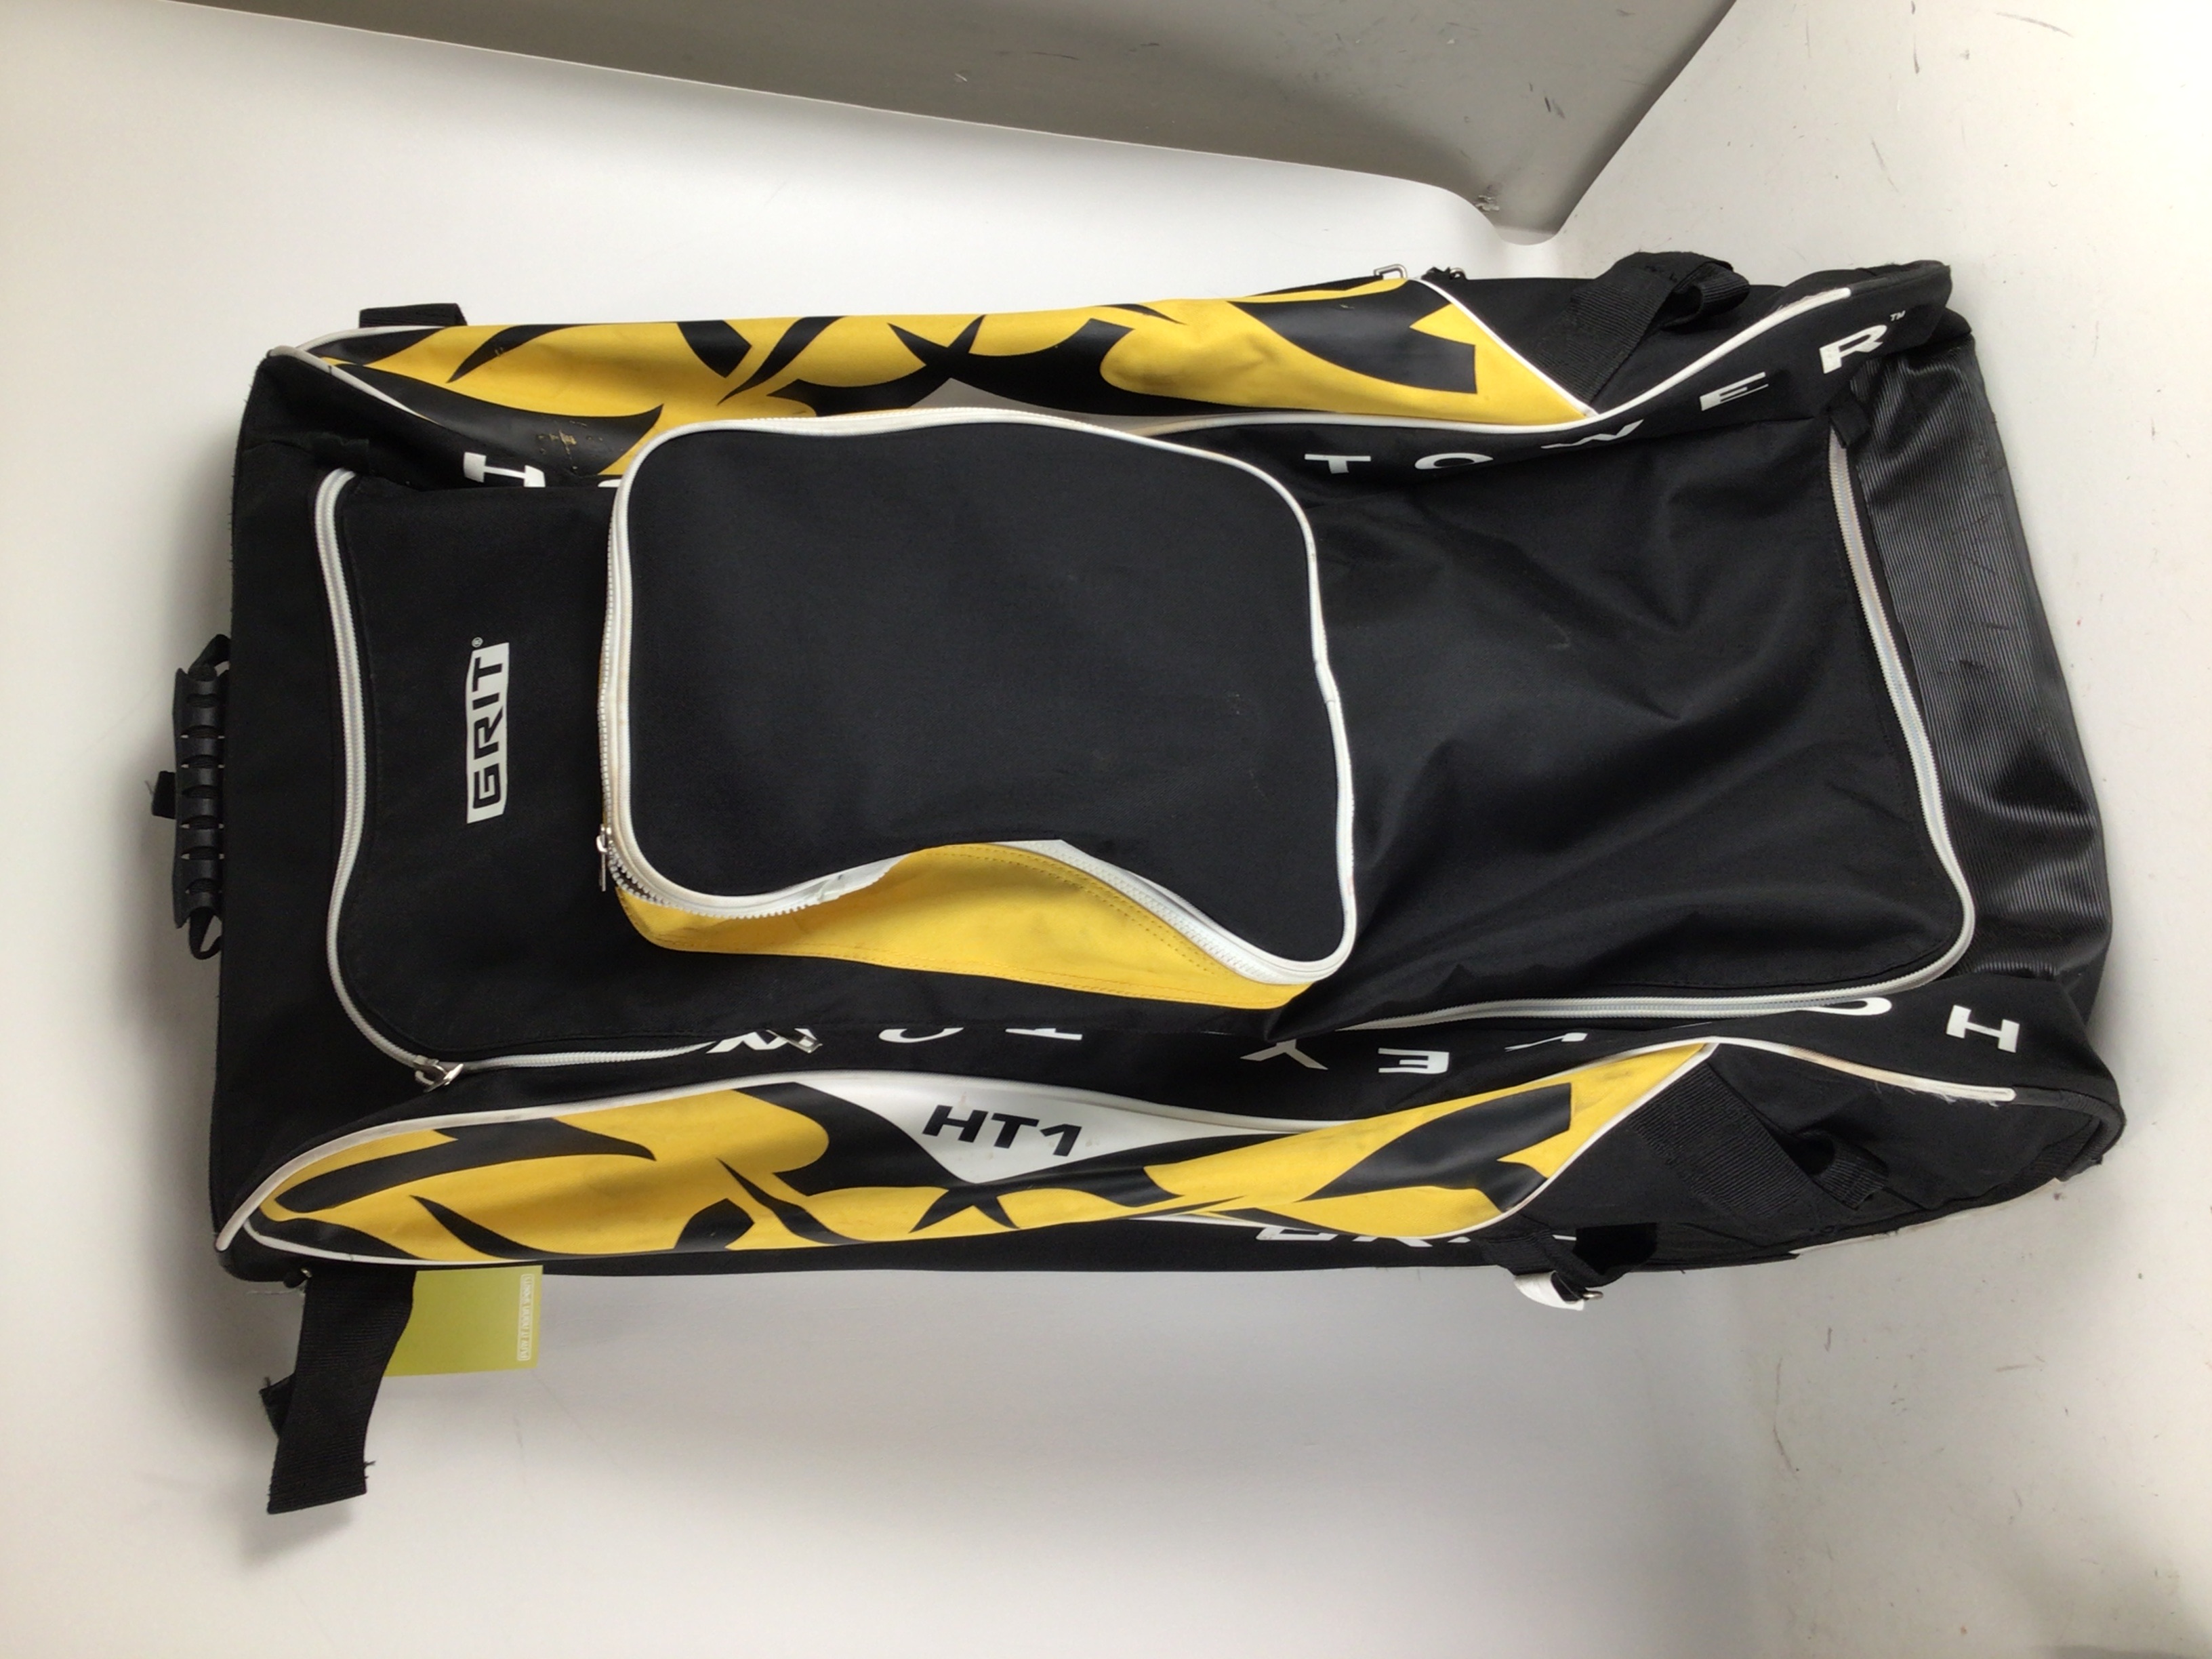 Used Grit HT1 36 IN SR WHEELED HOCKEY BAG TOWER Hockey Equipment Bags Hockey Equipment Bags